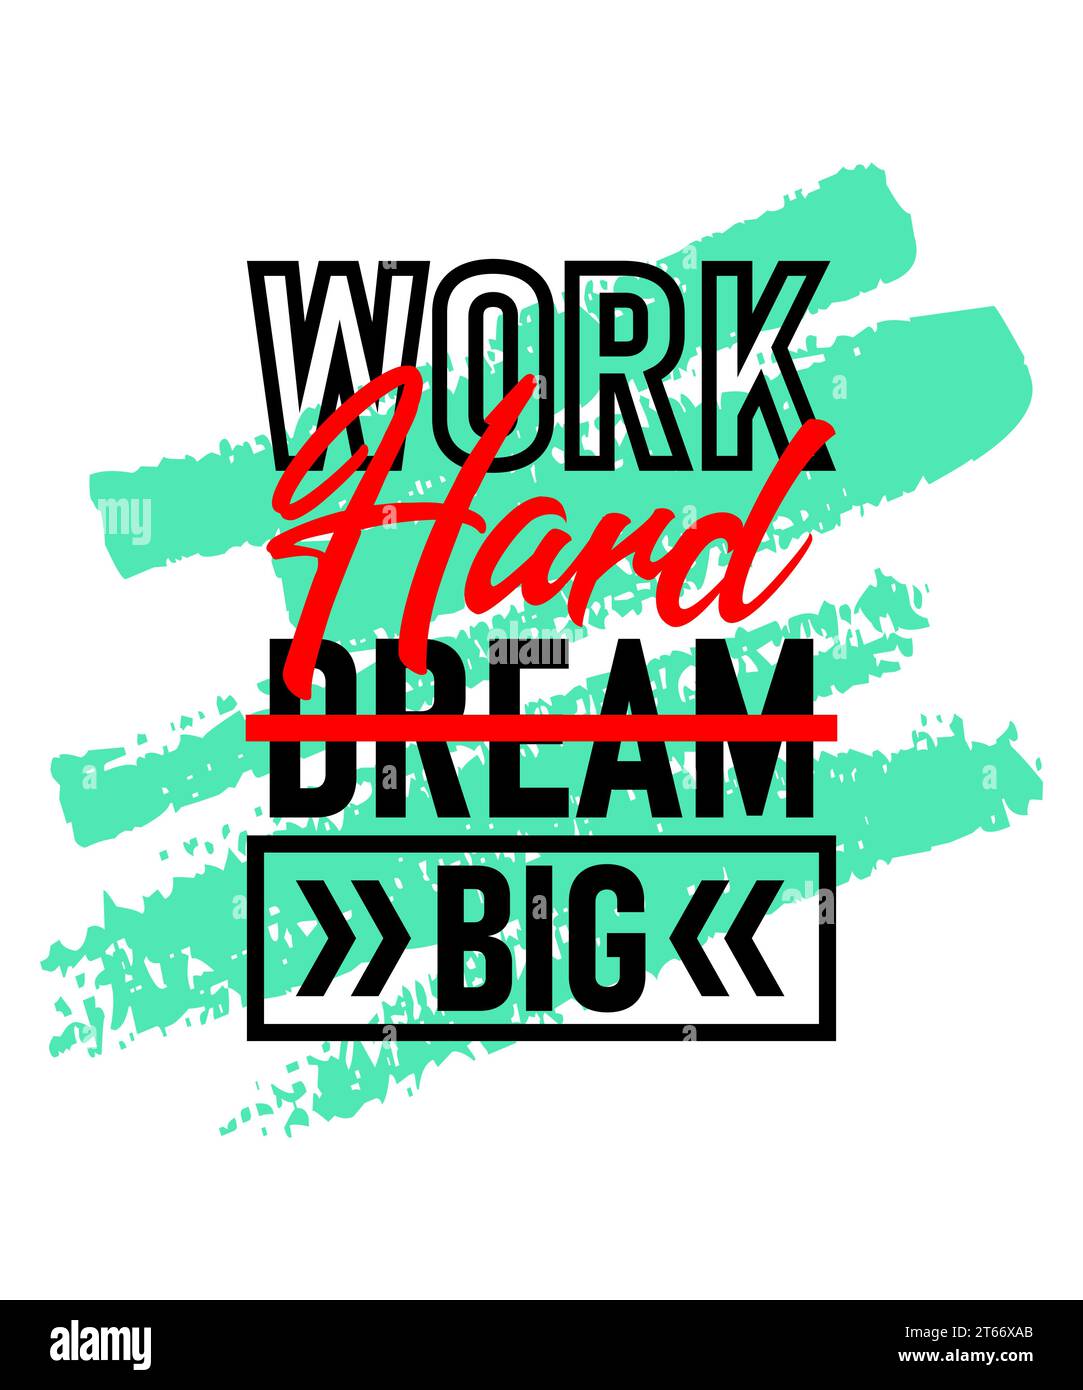 Work hard dream big motivational inspirational quote design on brush strokes background, Short phrases quotes, typography, slogan grunge Stock Vector